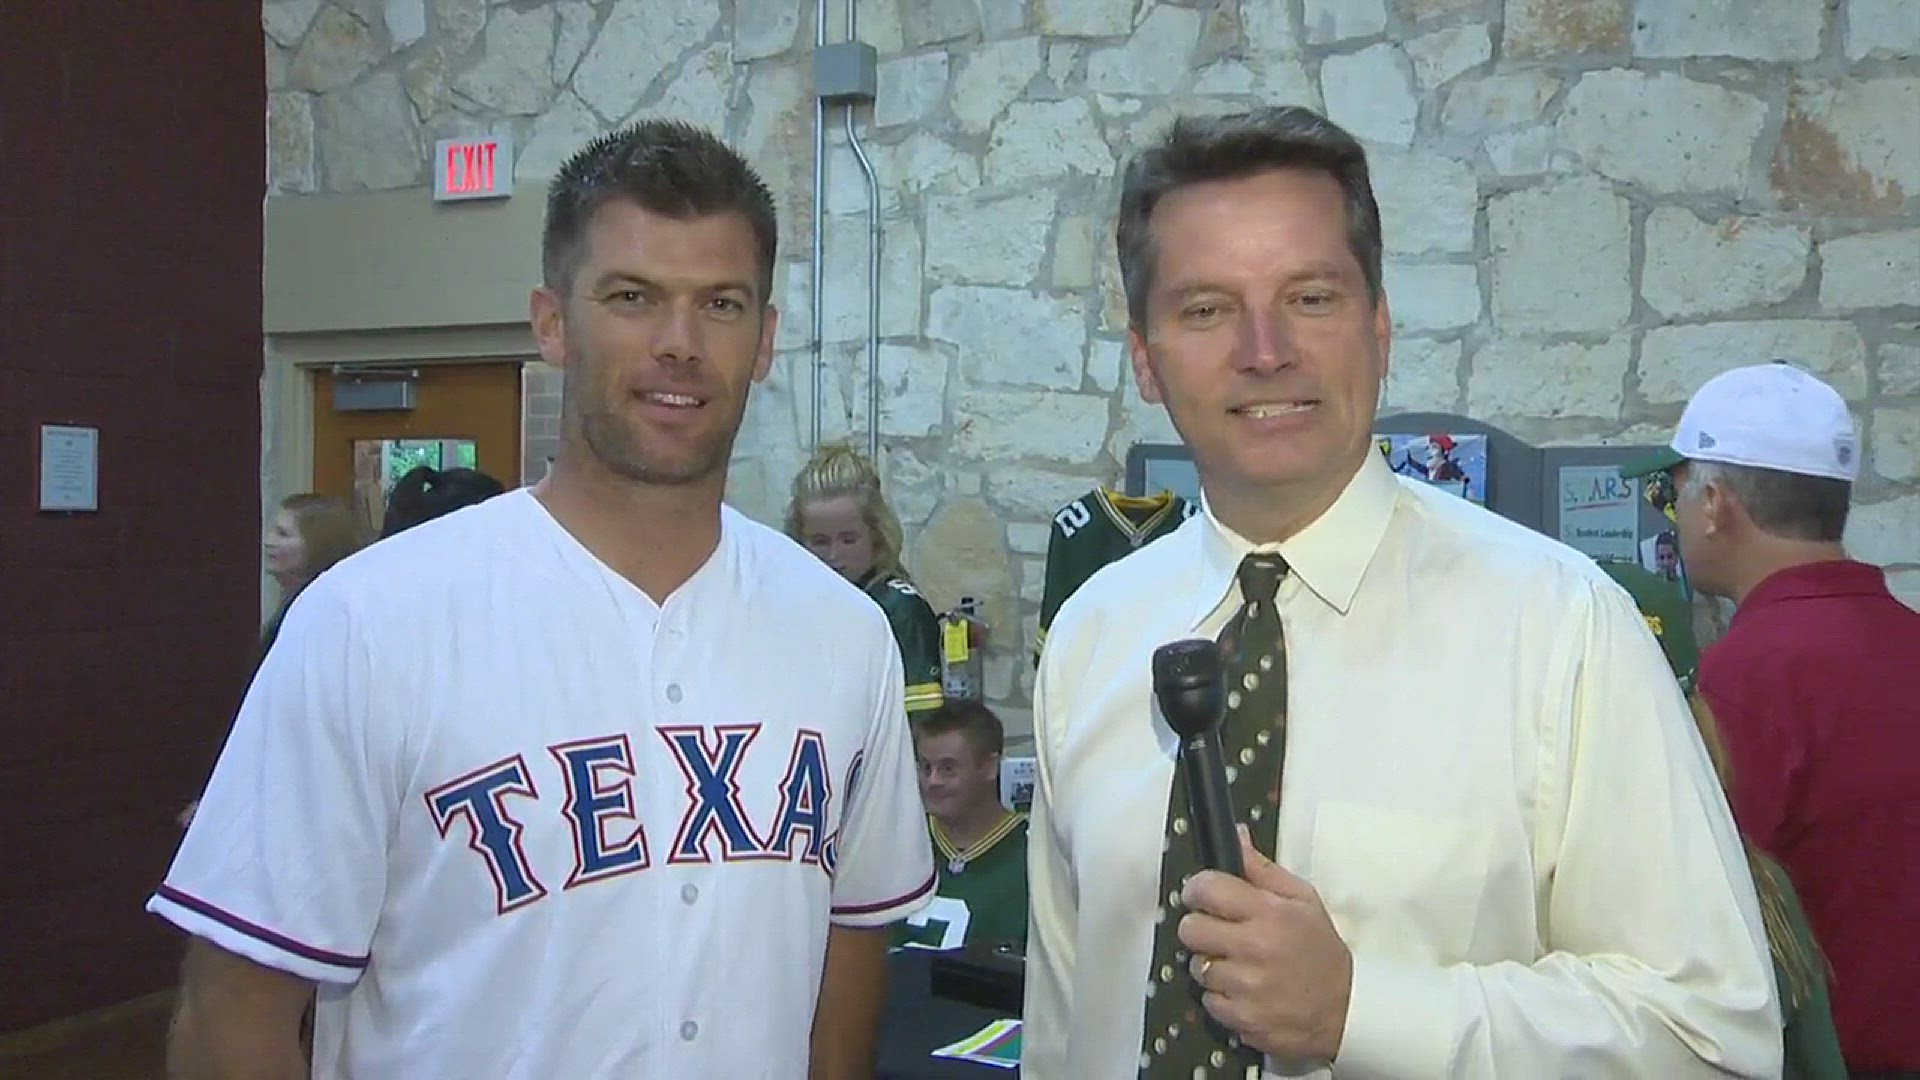 KVUE's Mike Barnes talks with Green Bay Packers kicker Mason Crosby, who is back home in Georgetown helping the community.